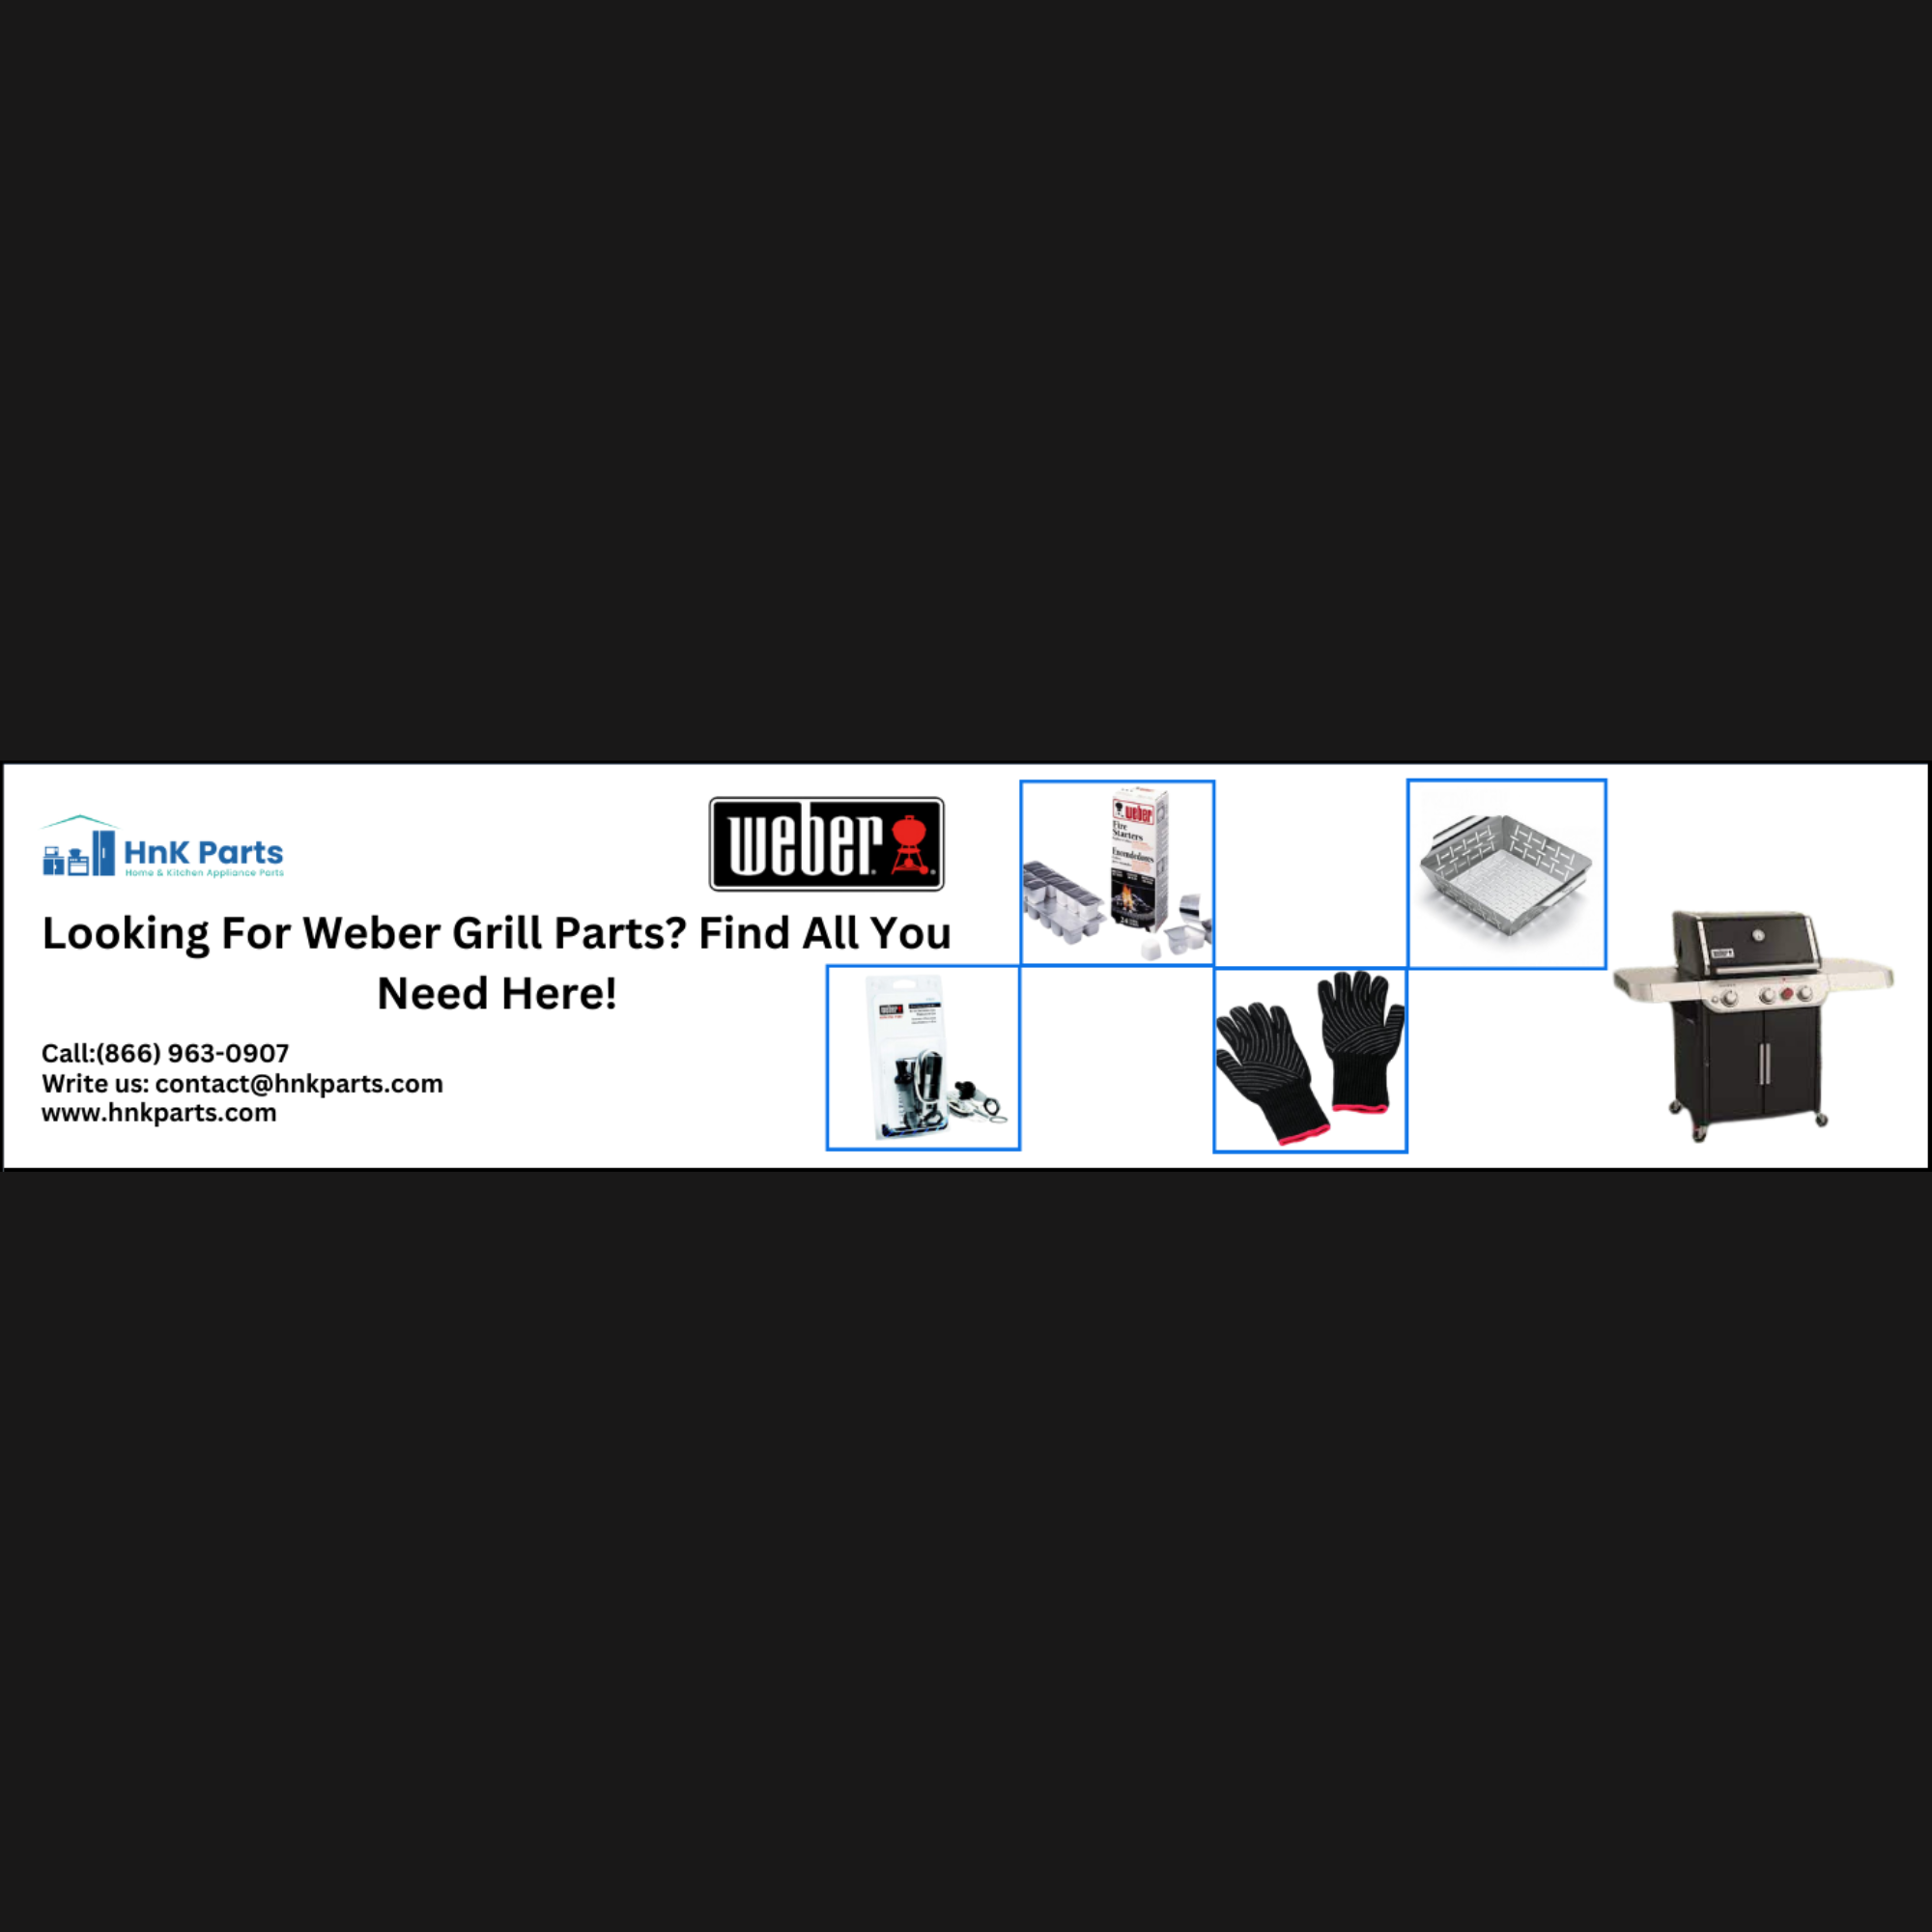 Weber Grill Parts | High Quality Replacement Parts - HnKParts - Chicago Tools, Equipment